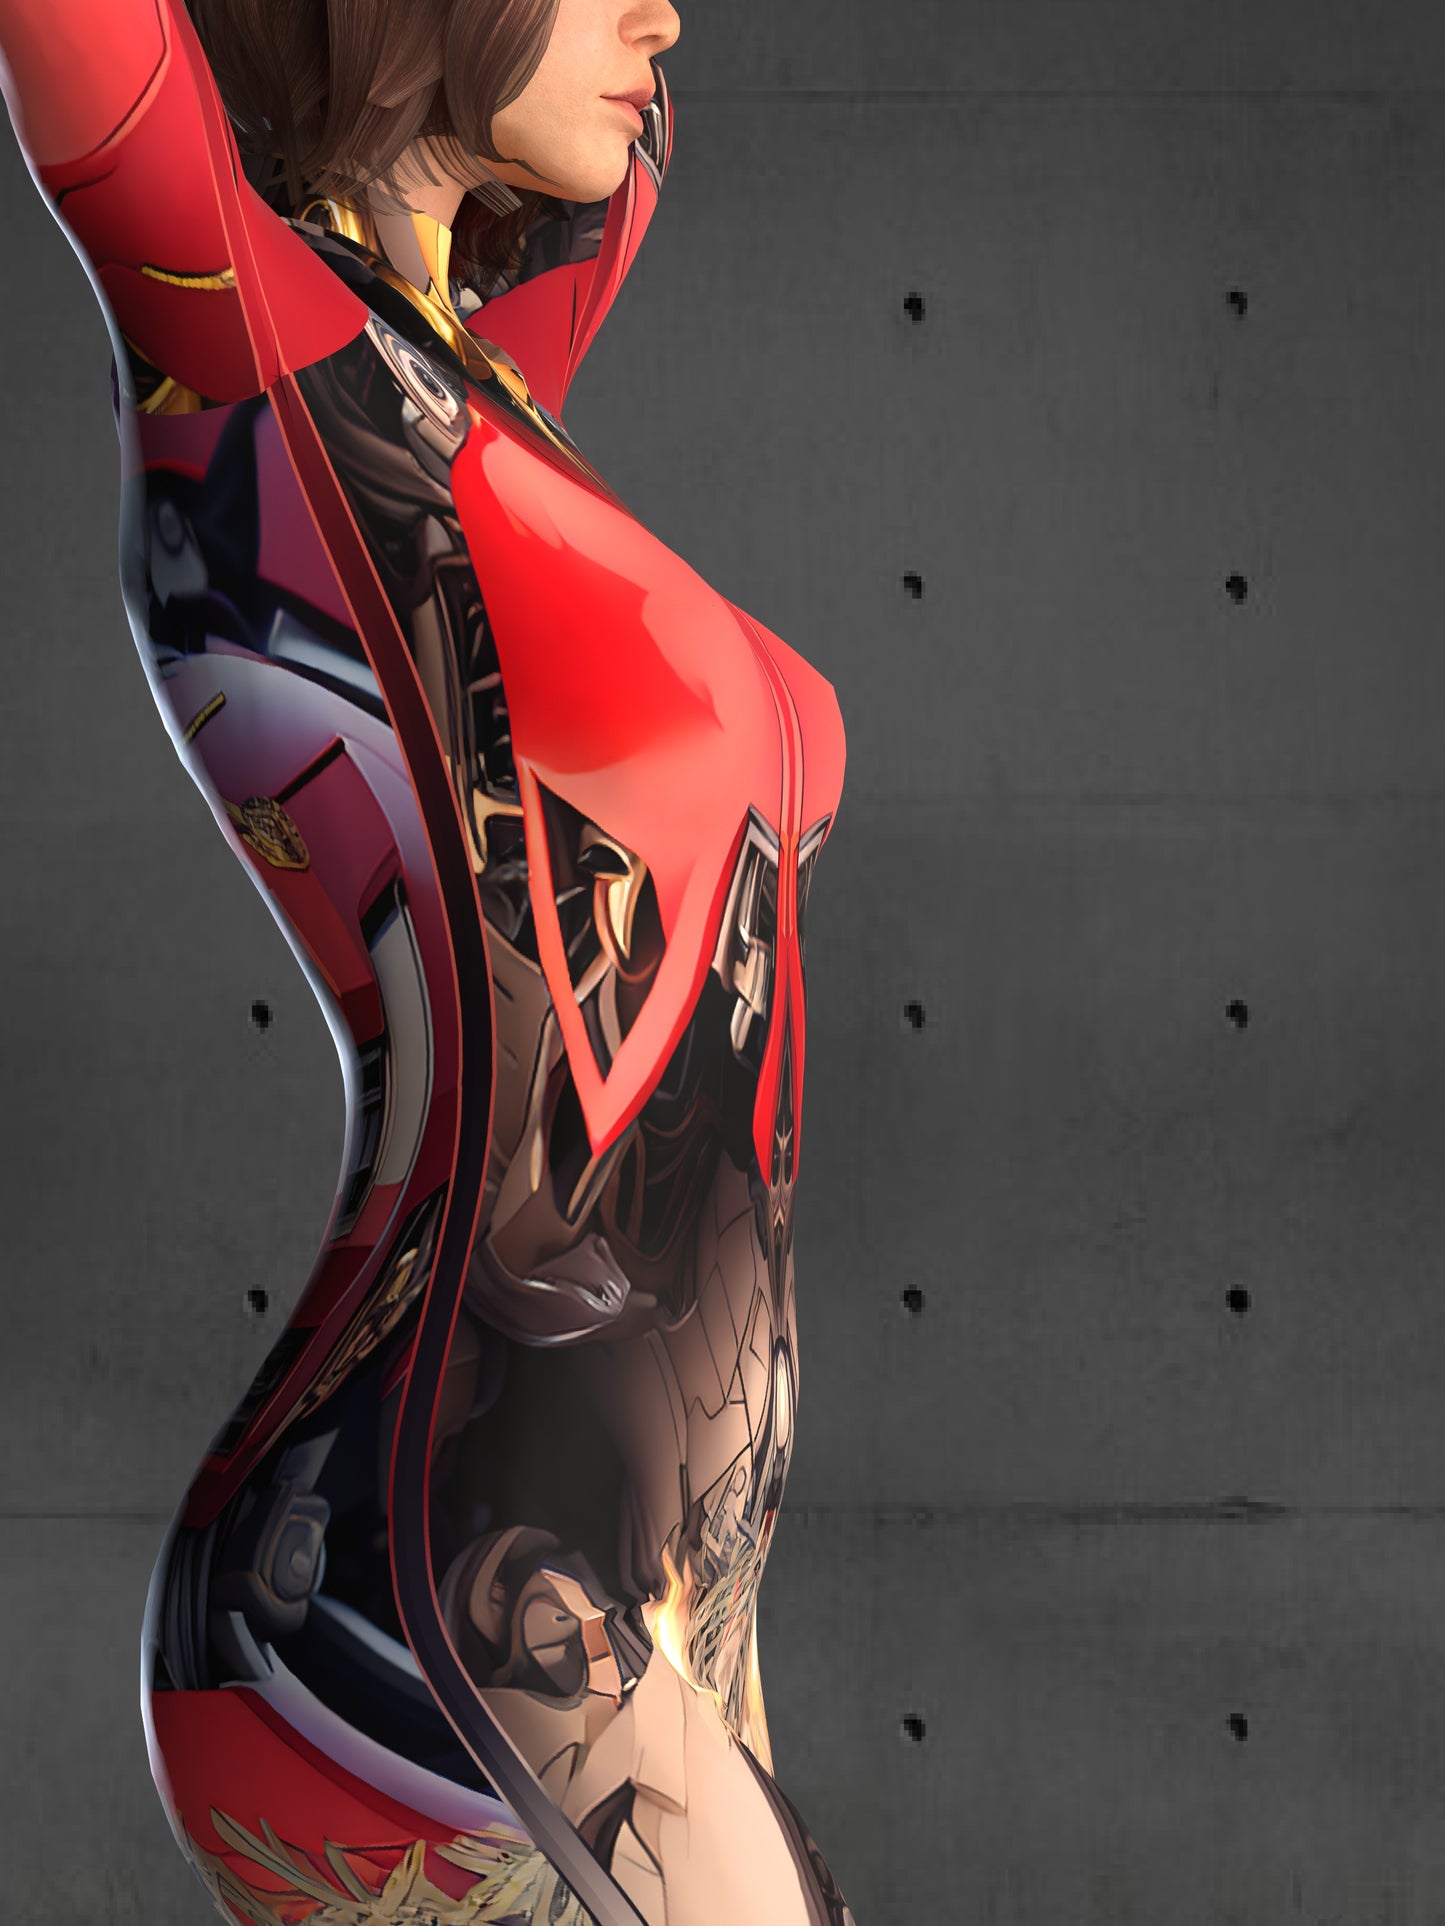 Sexy Armor Bodysuit (Custom Fit Available), Futuristic Bodysuit, Cyberpunk Clothing, Rave Outfit, Robot Costume for Women, Red Bodysuit